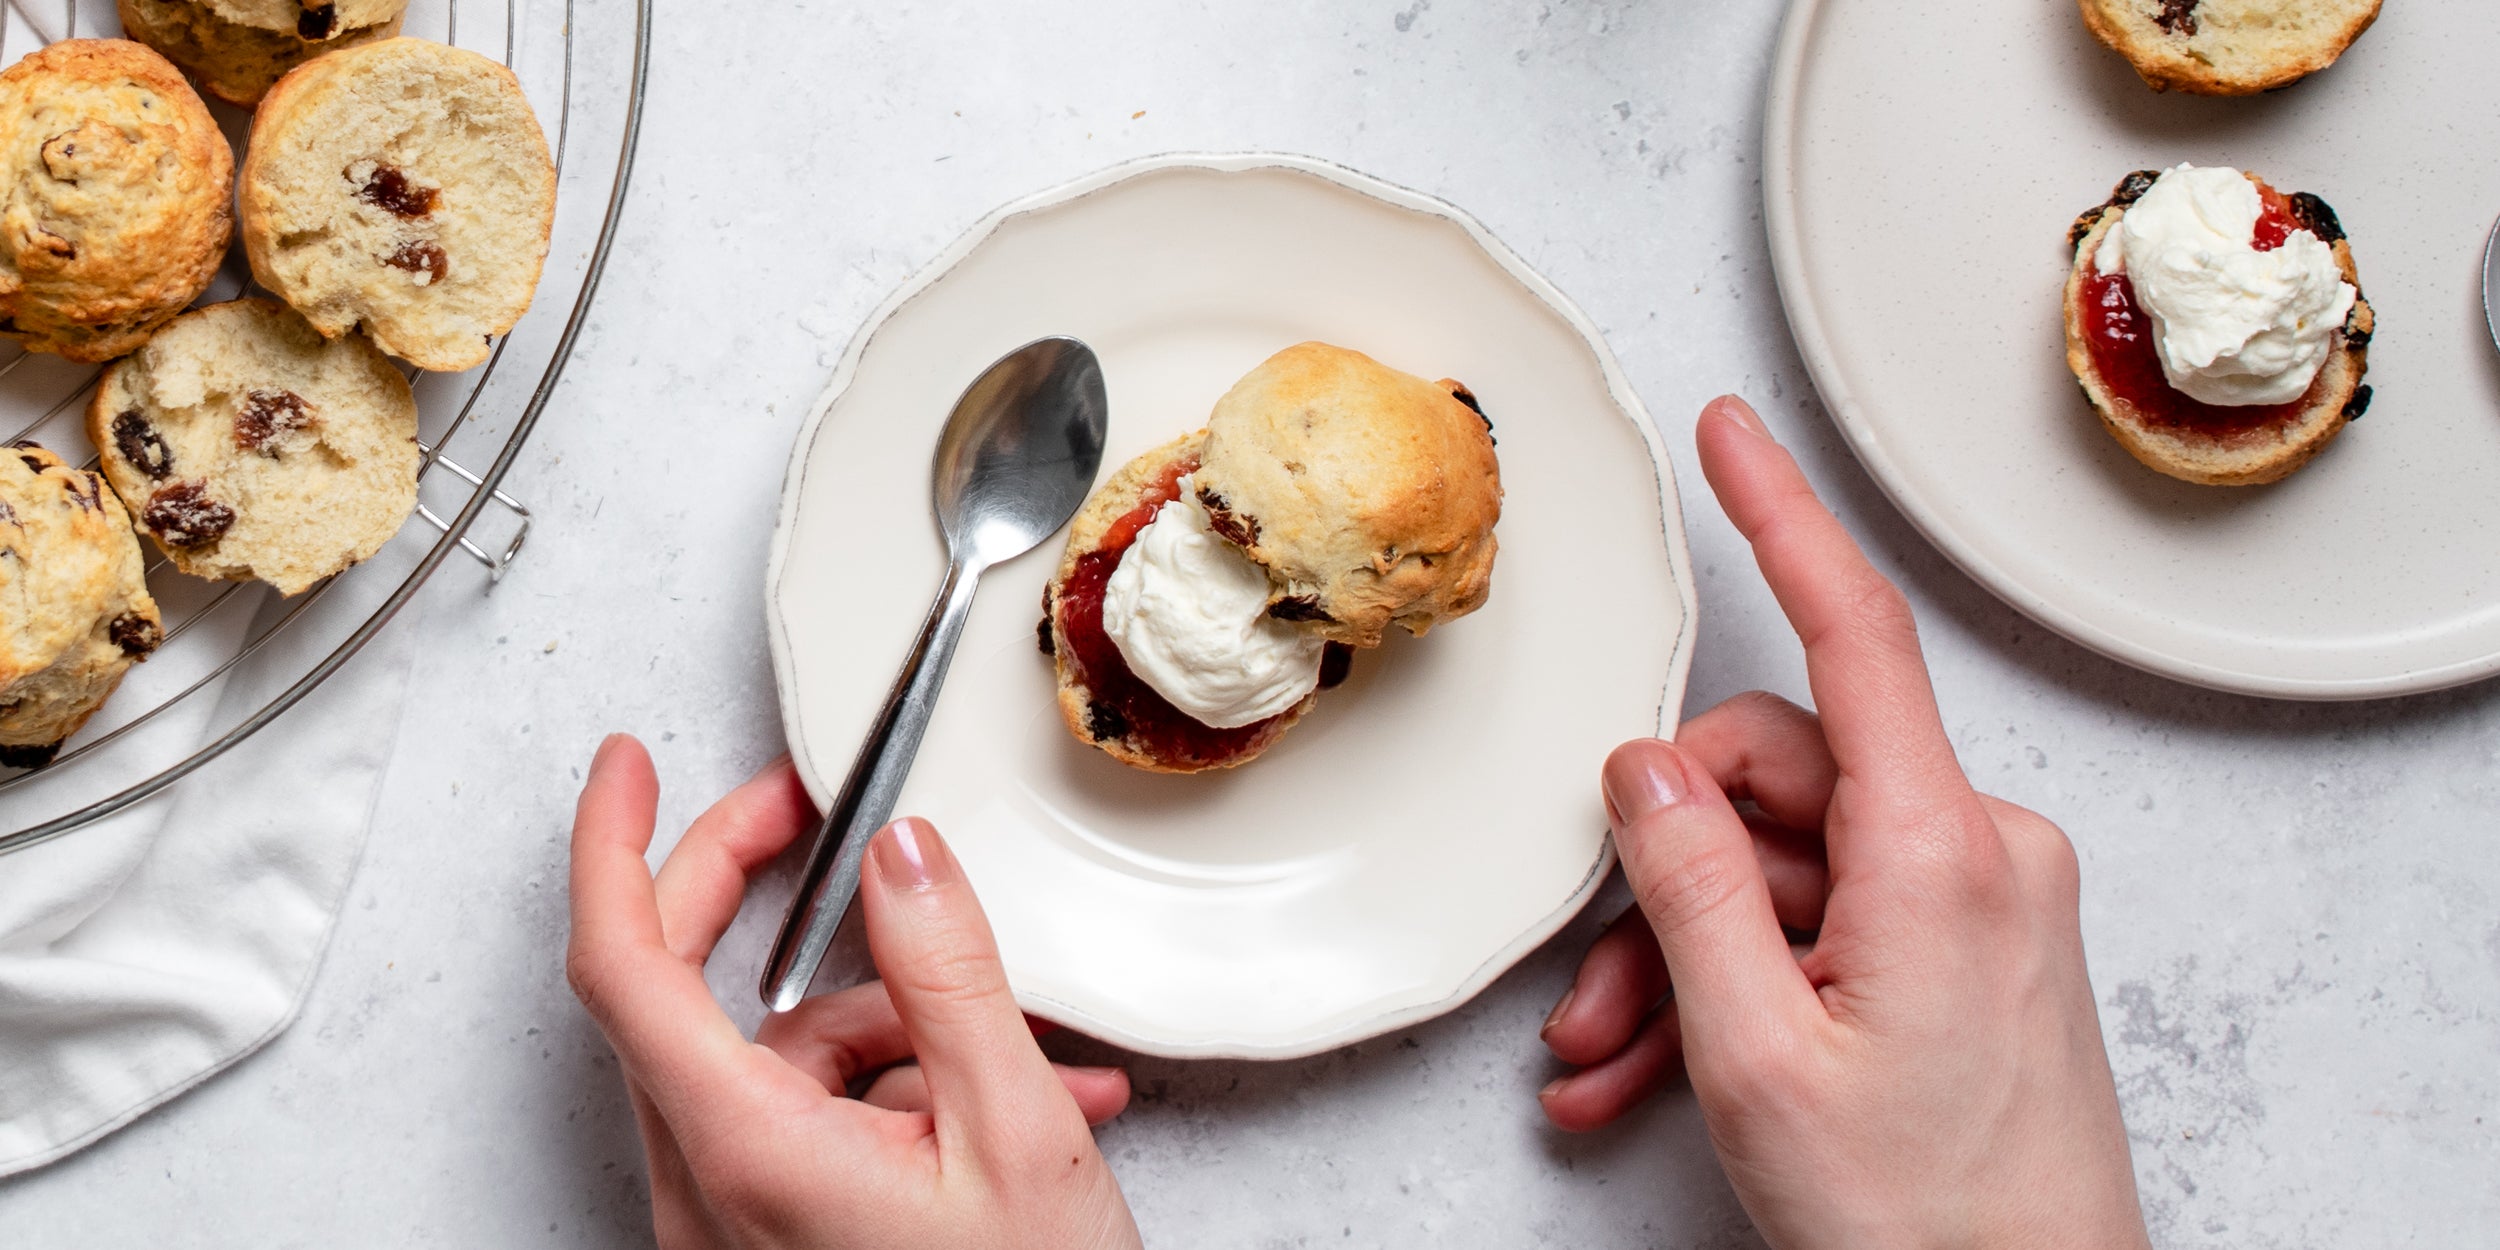 Top view of Fruit Scone sliced in half with cream and jam, with a hand holding a spoon ready to dig in